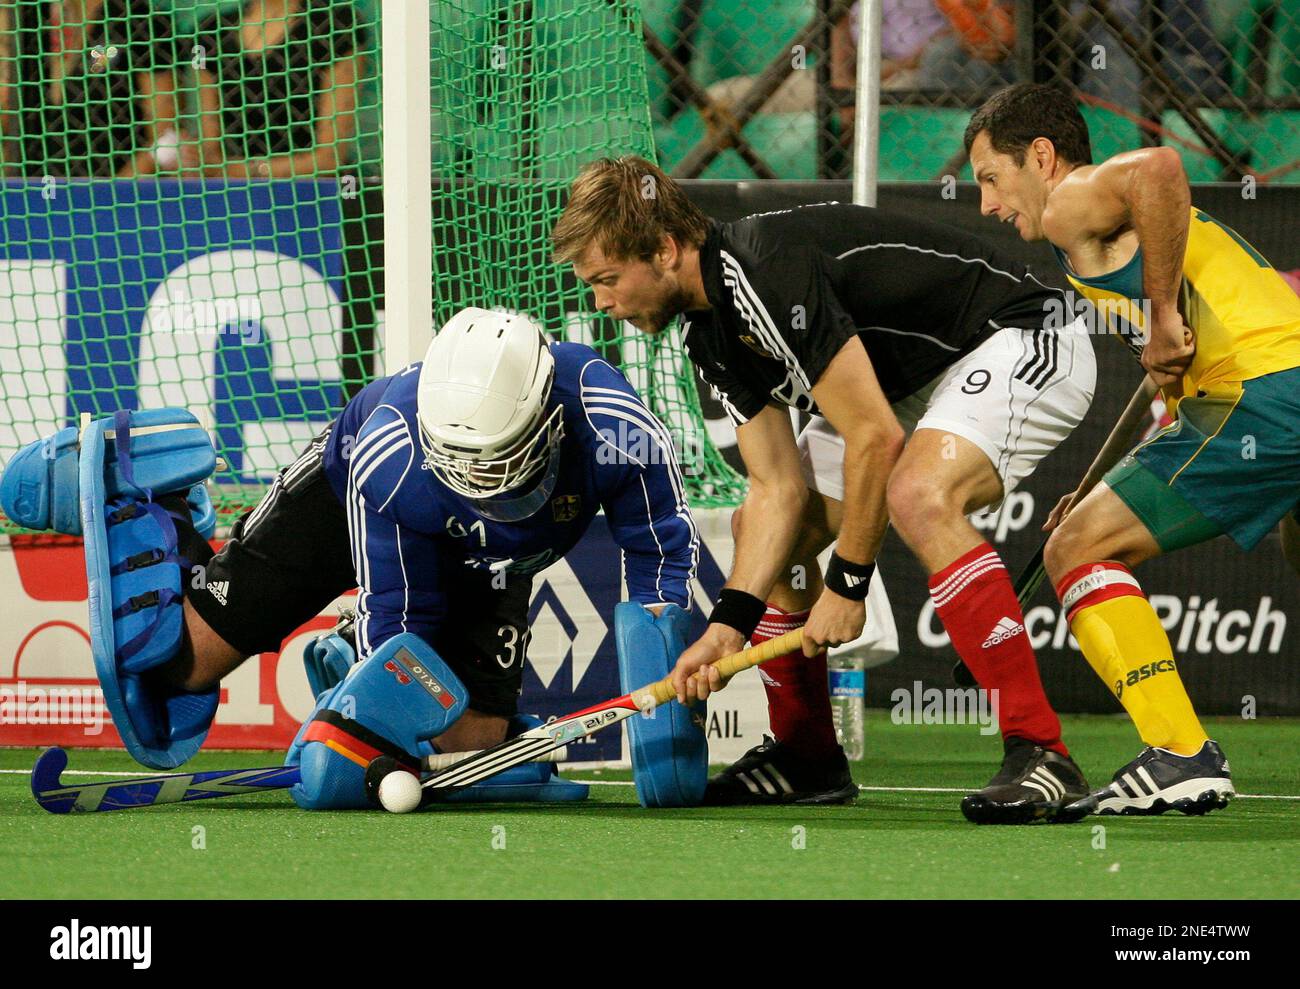 Mens field hockey goalkeeper in England coming out to warm-up Stock Photo -  Alamy